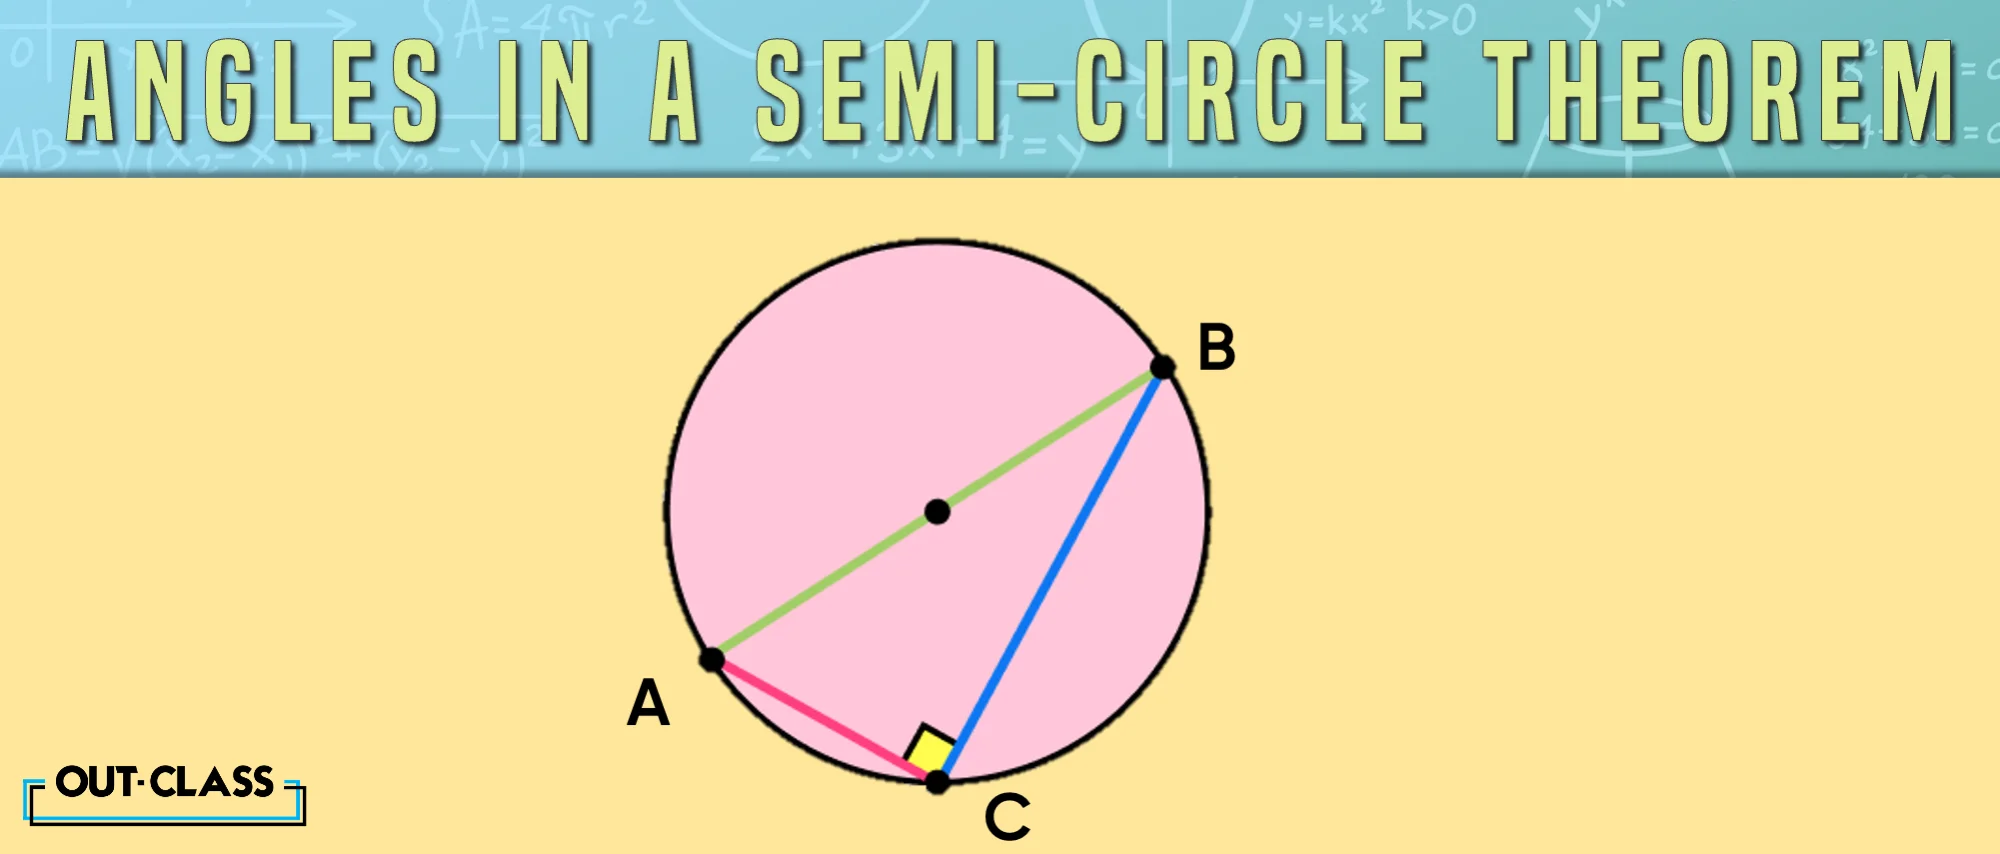 Another circle properties is the angle in the semi-circle theorem.